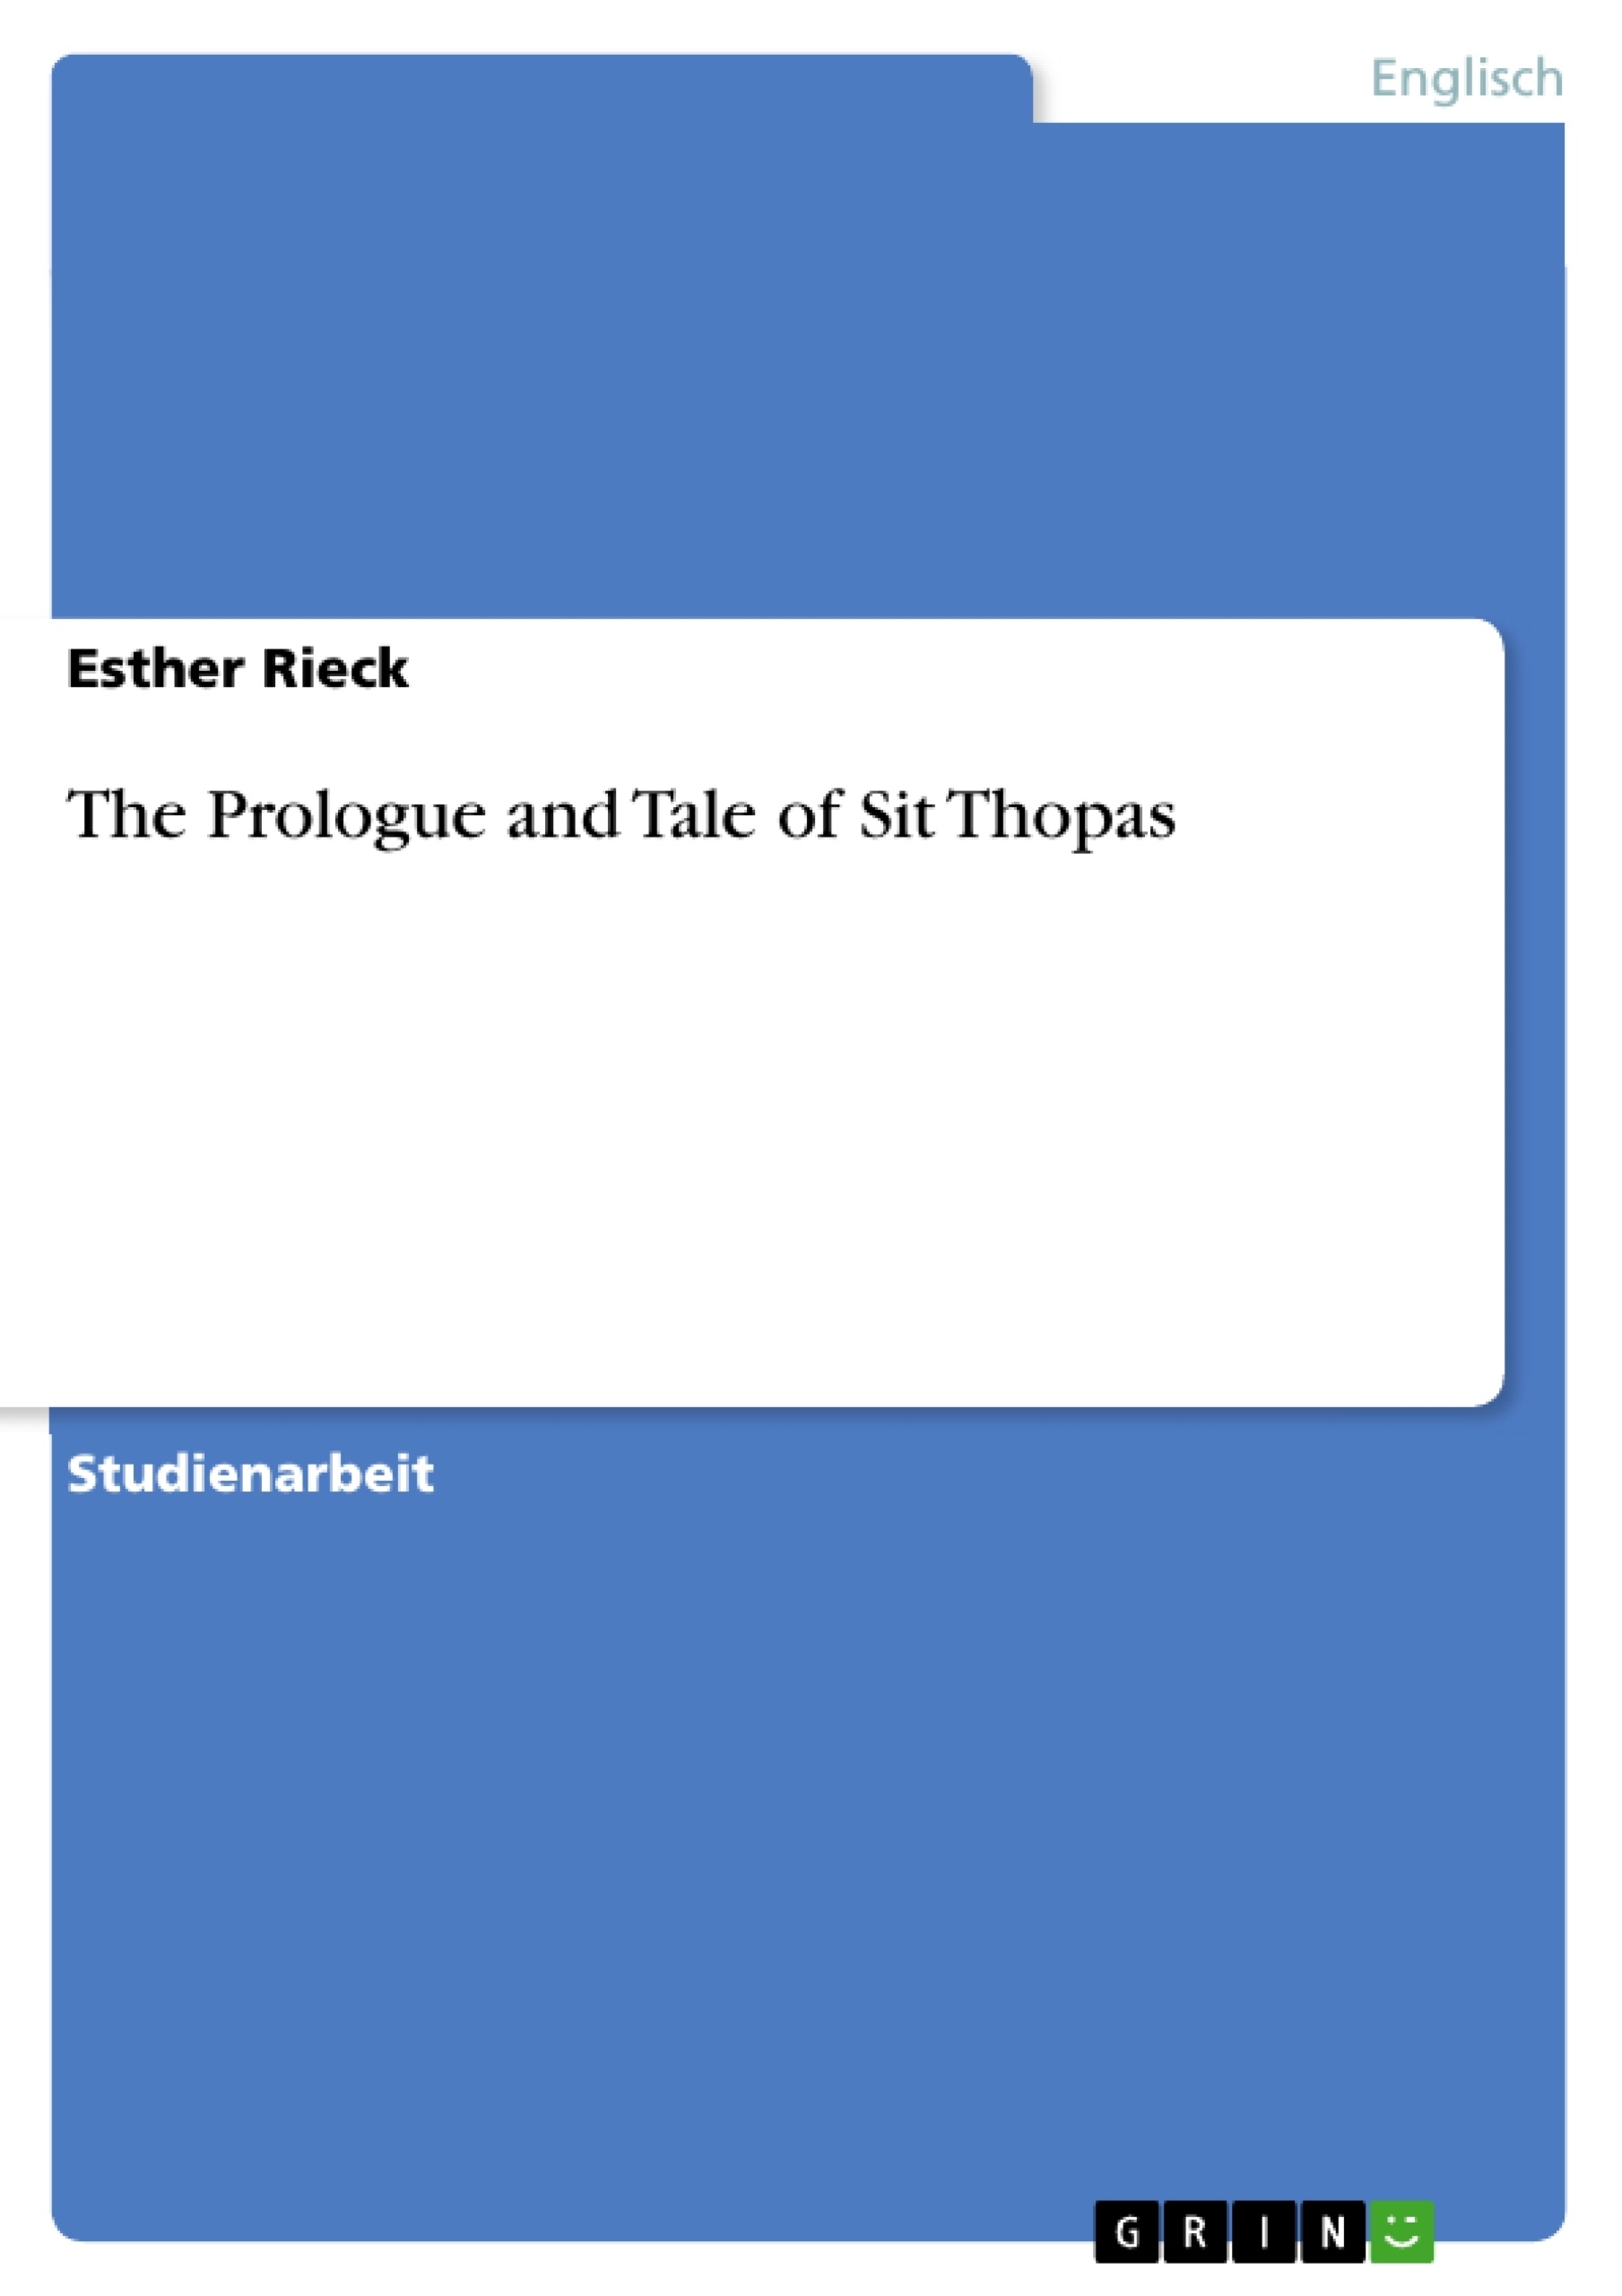 Titel: The Prologue and Tale of Sit Thopas